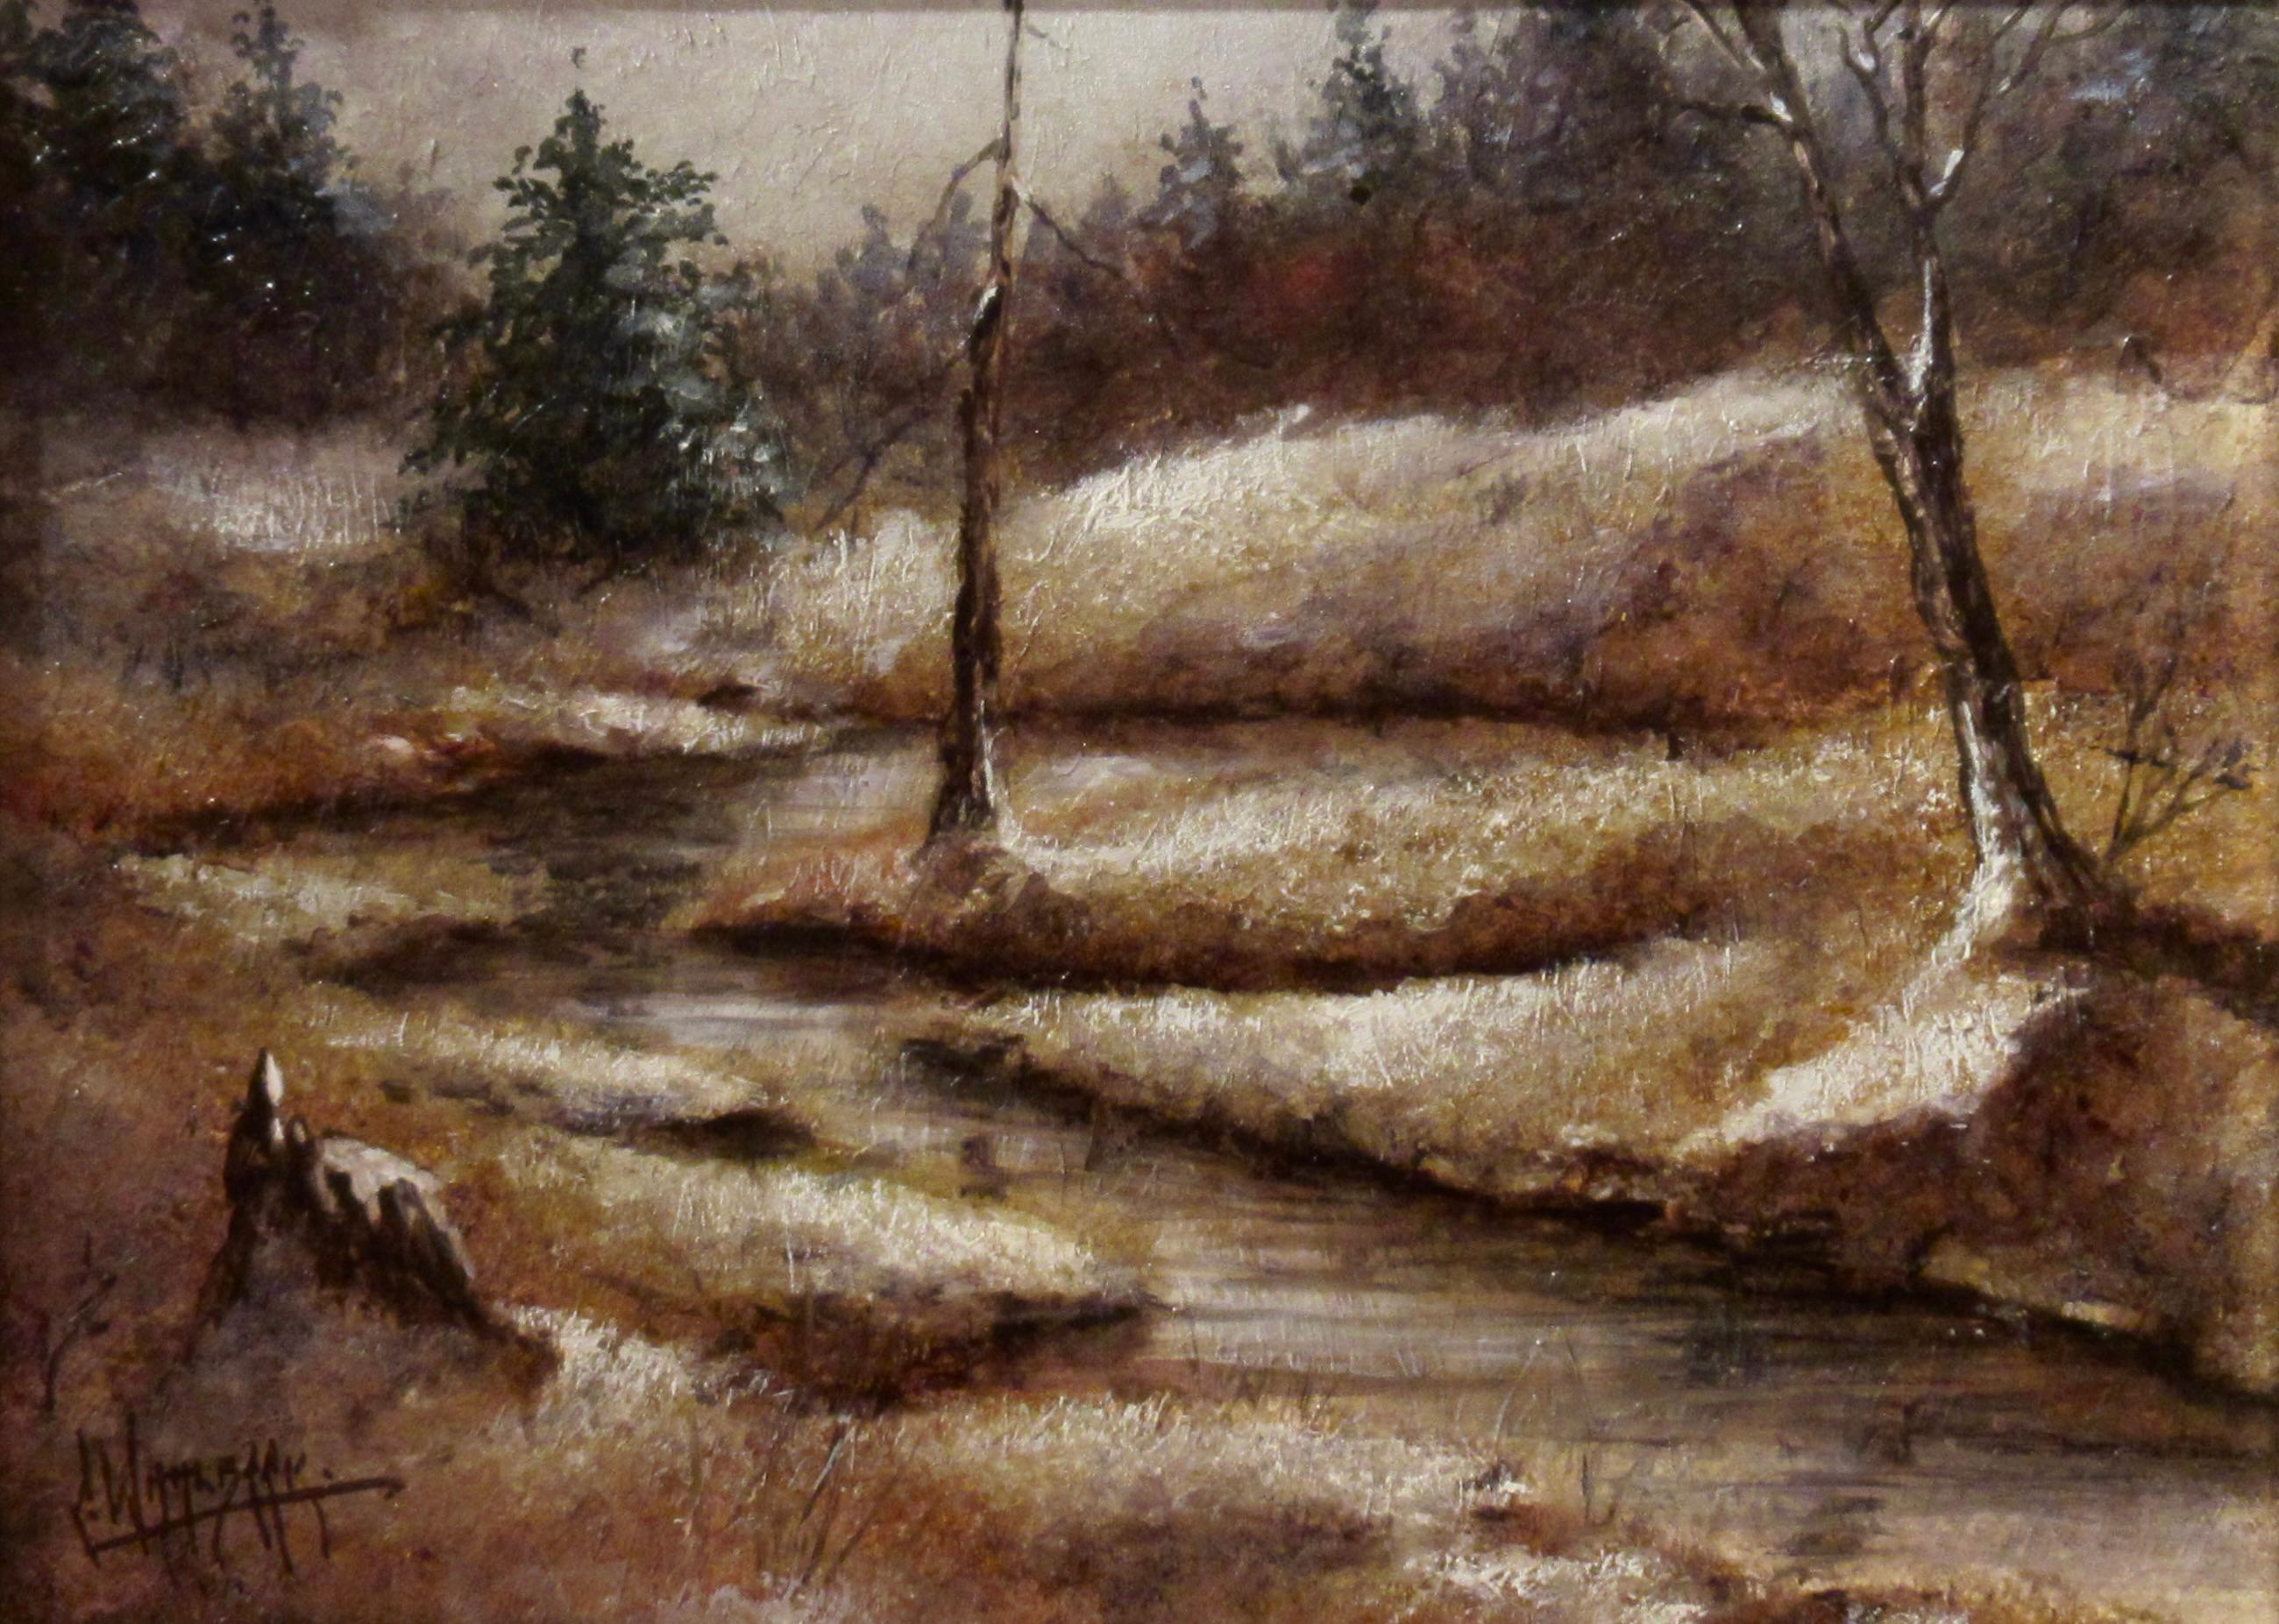 Hiver sauvage - Painting de Carlo Wahlbeck